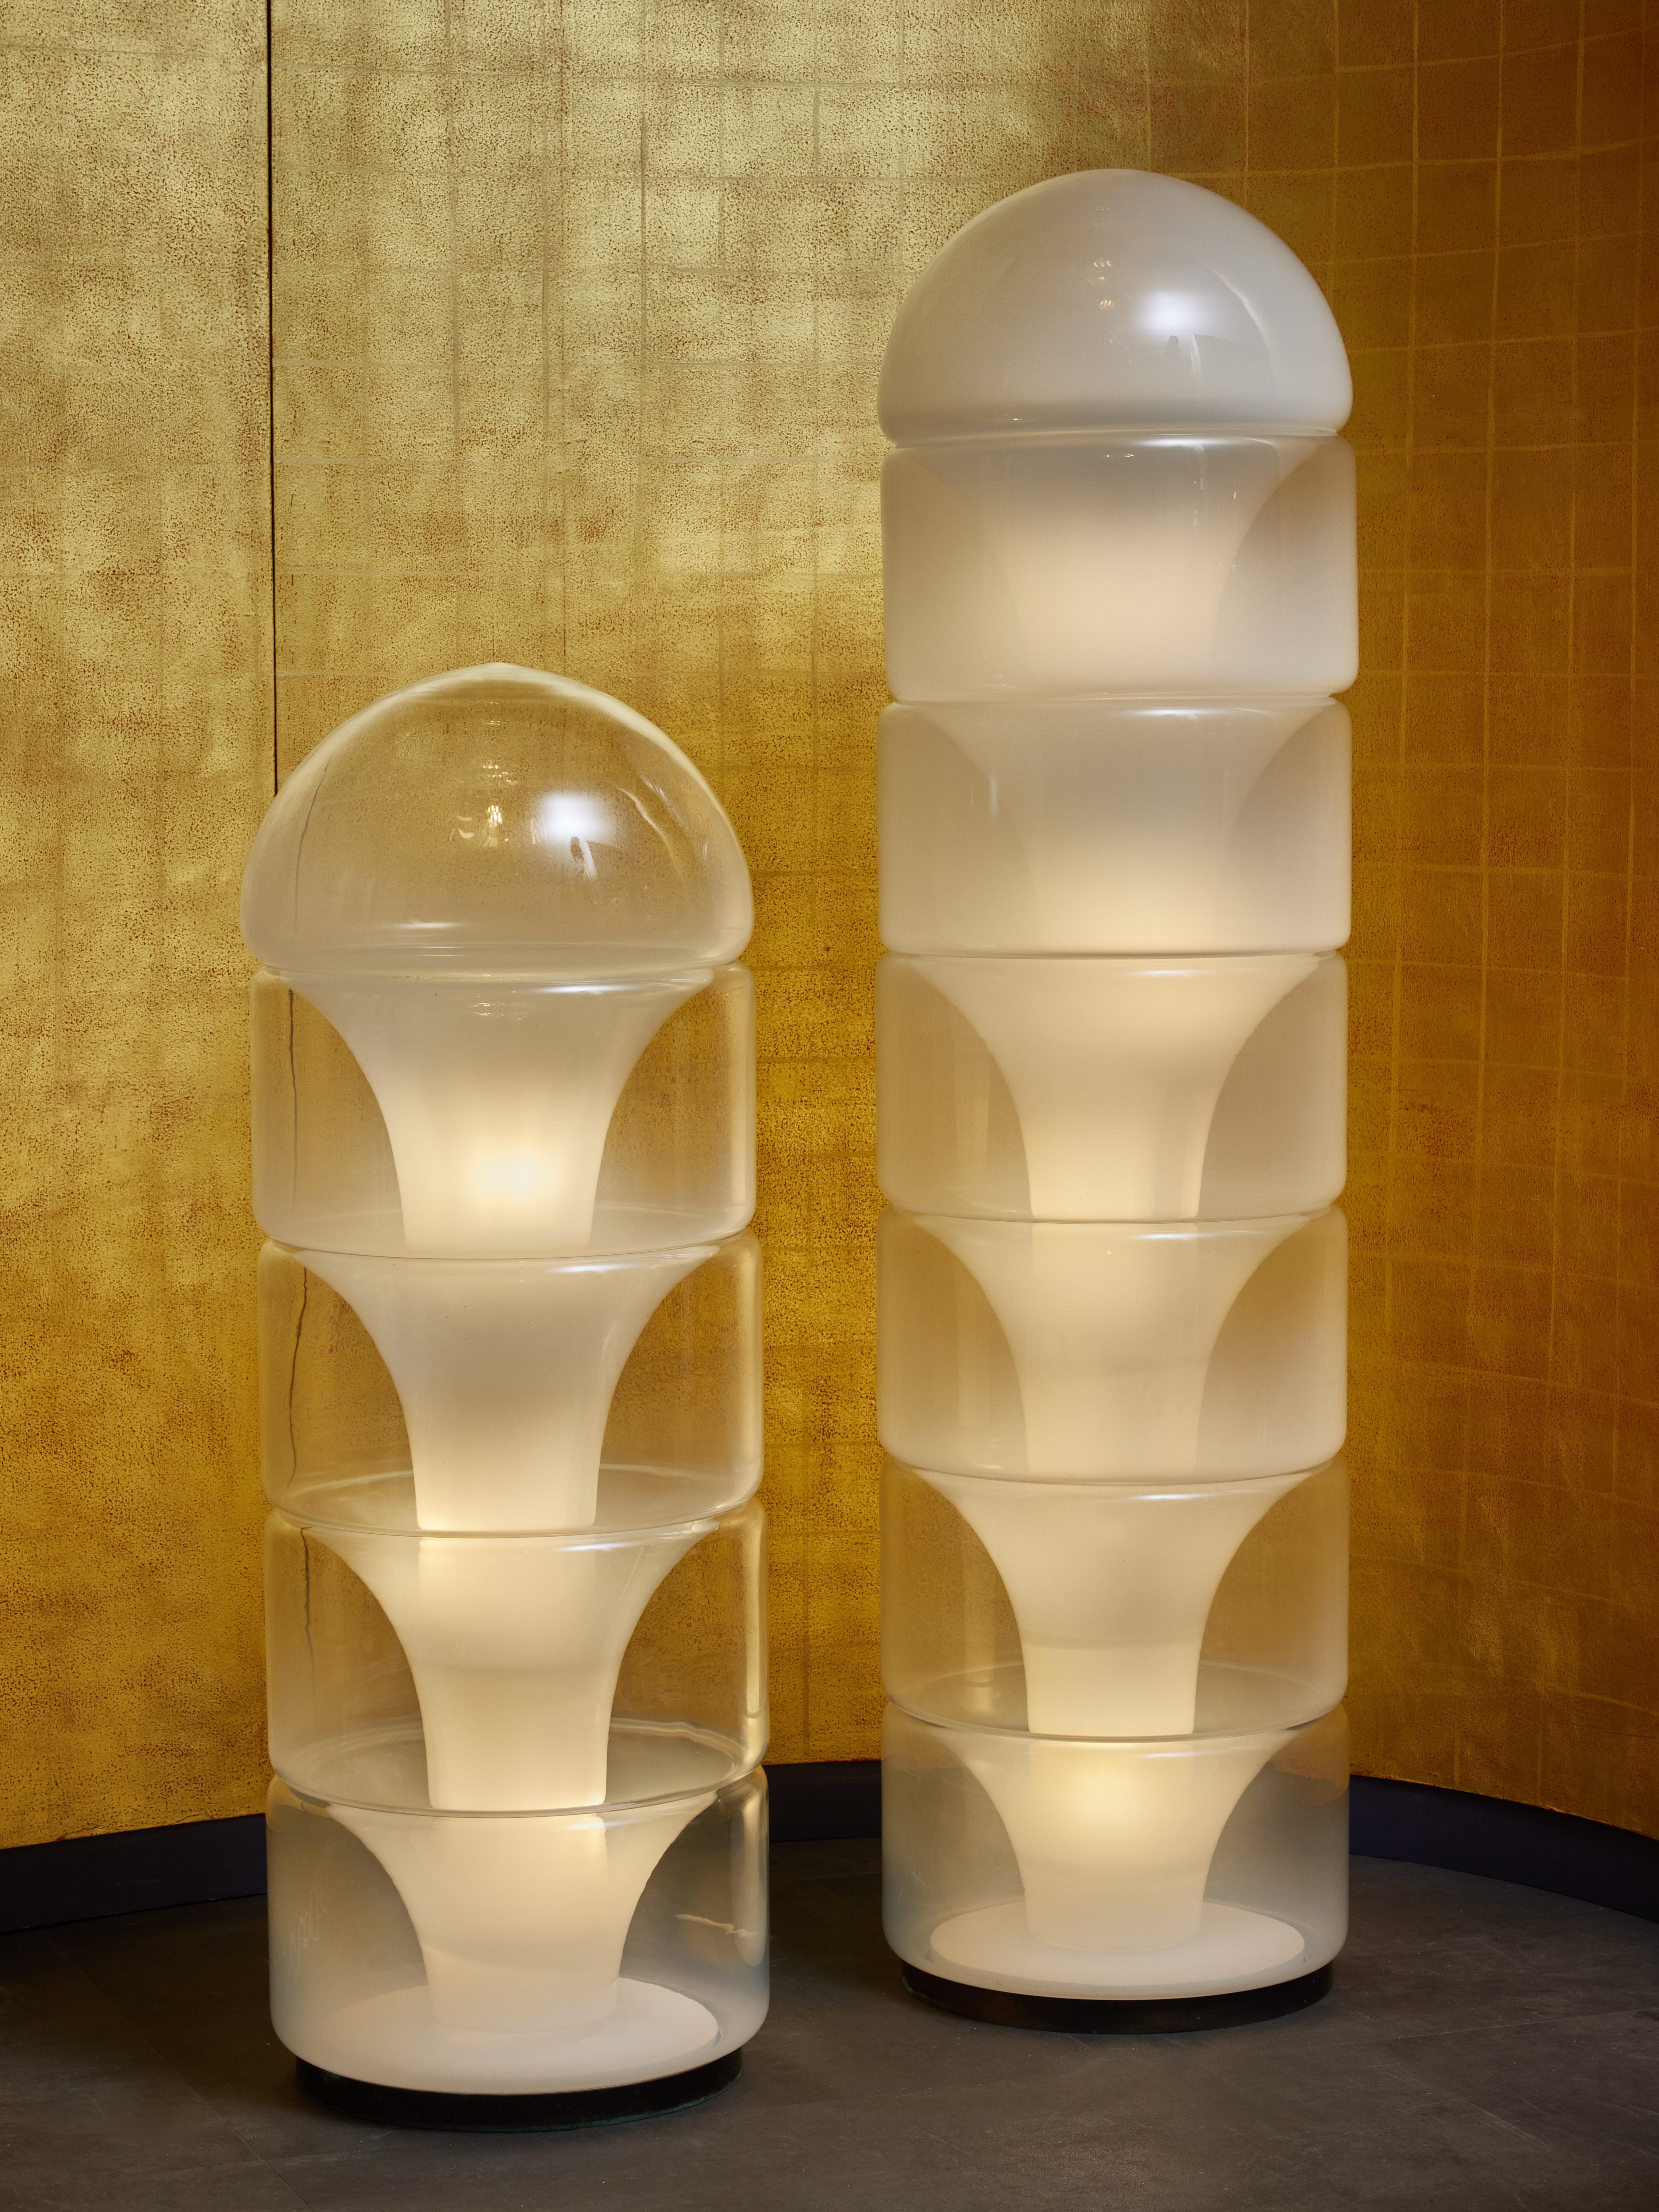 Sfumato glass floor lamp designed by Carlo Nason for Mazzega.

This piece (pictured on the right) is made of a metal inner structure on which are stacked seven Murano glass elements spreading the light.